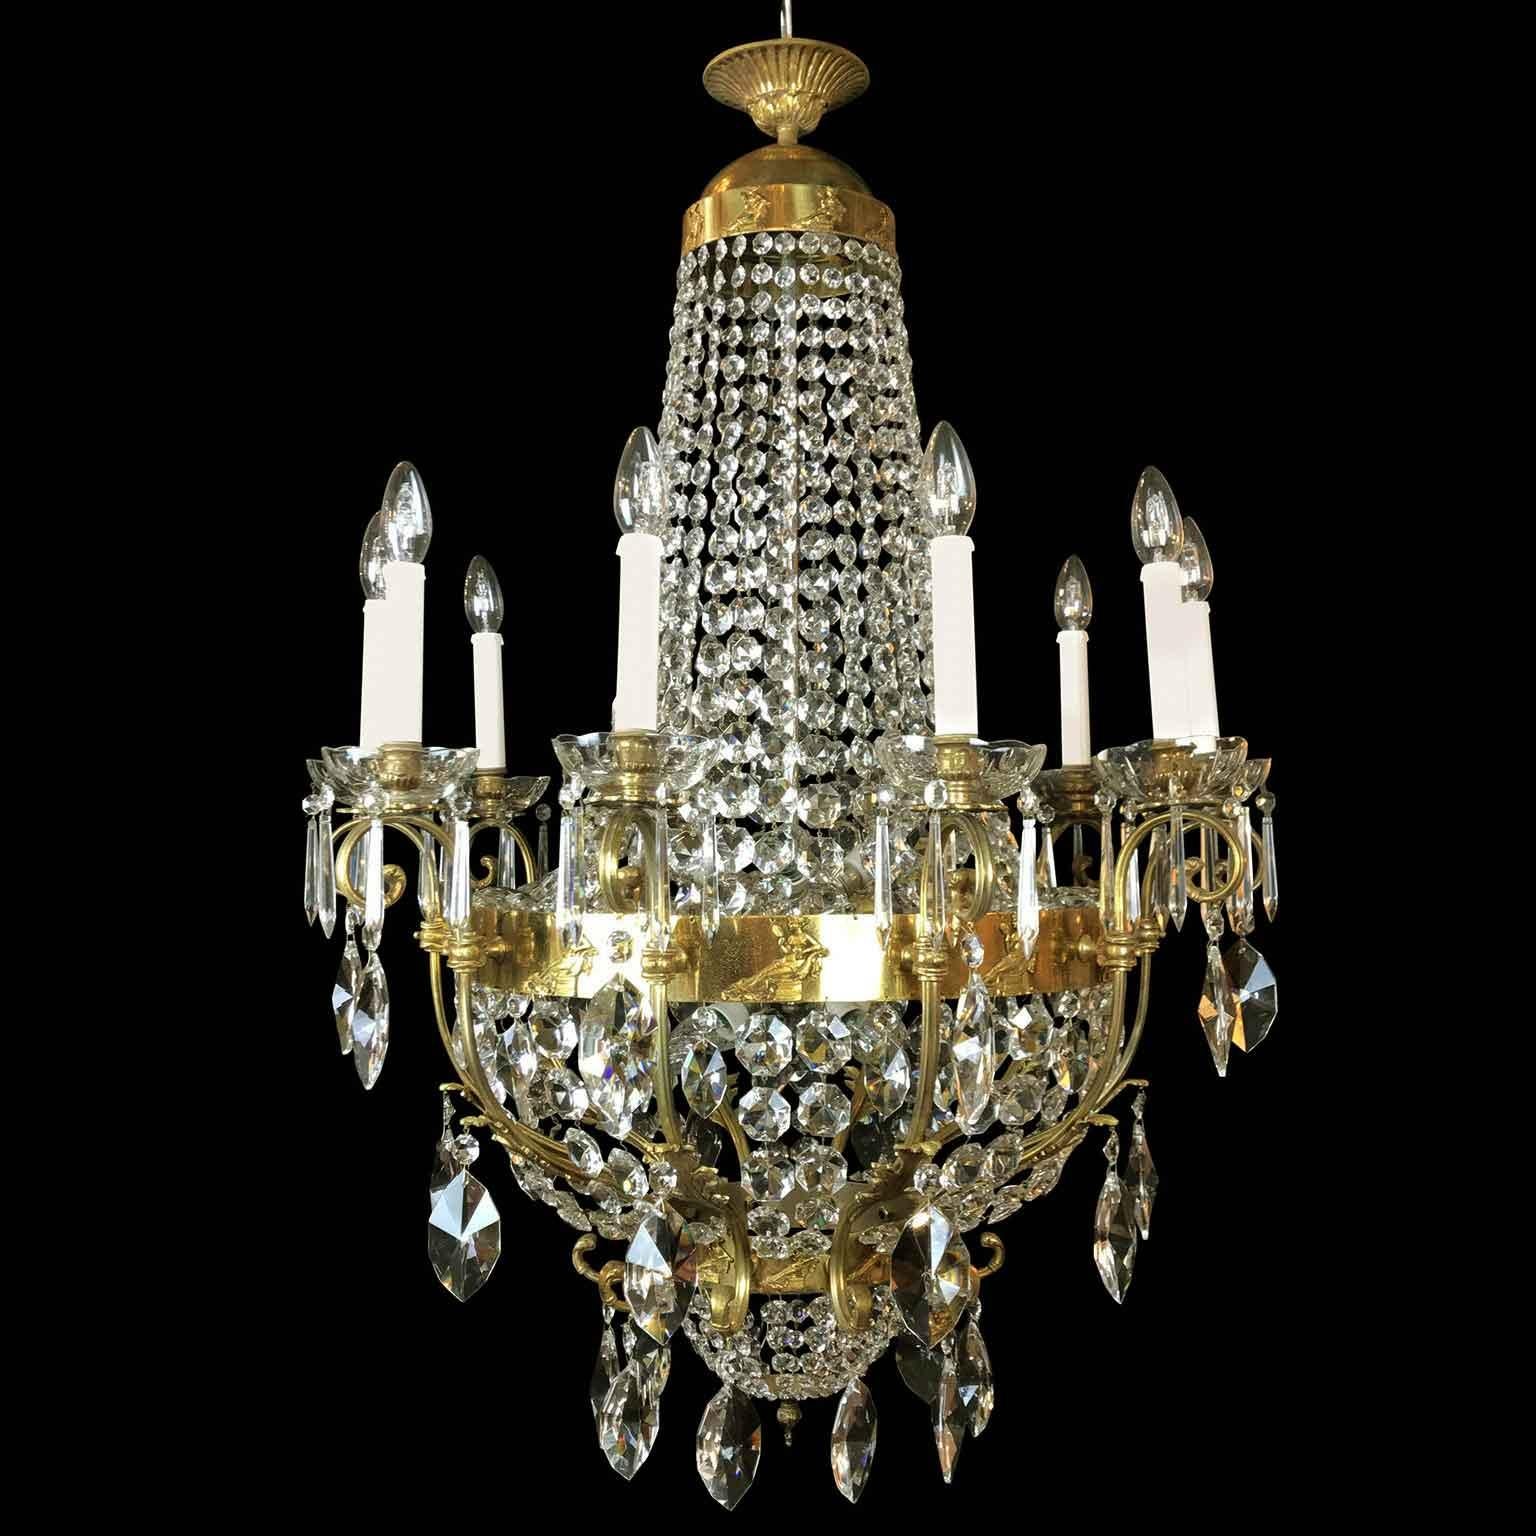 Bronze 20th Century Italian Neoclassical Style Crystal Chandelier Roman Female Figures For Sale